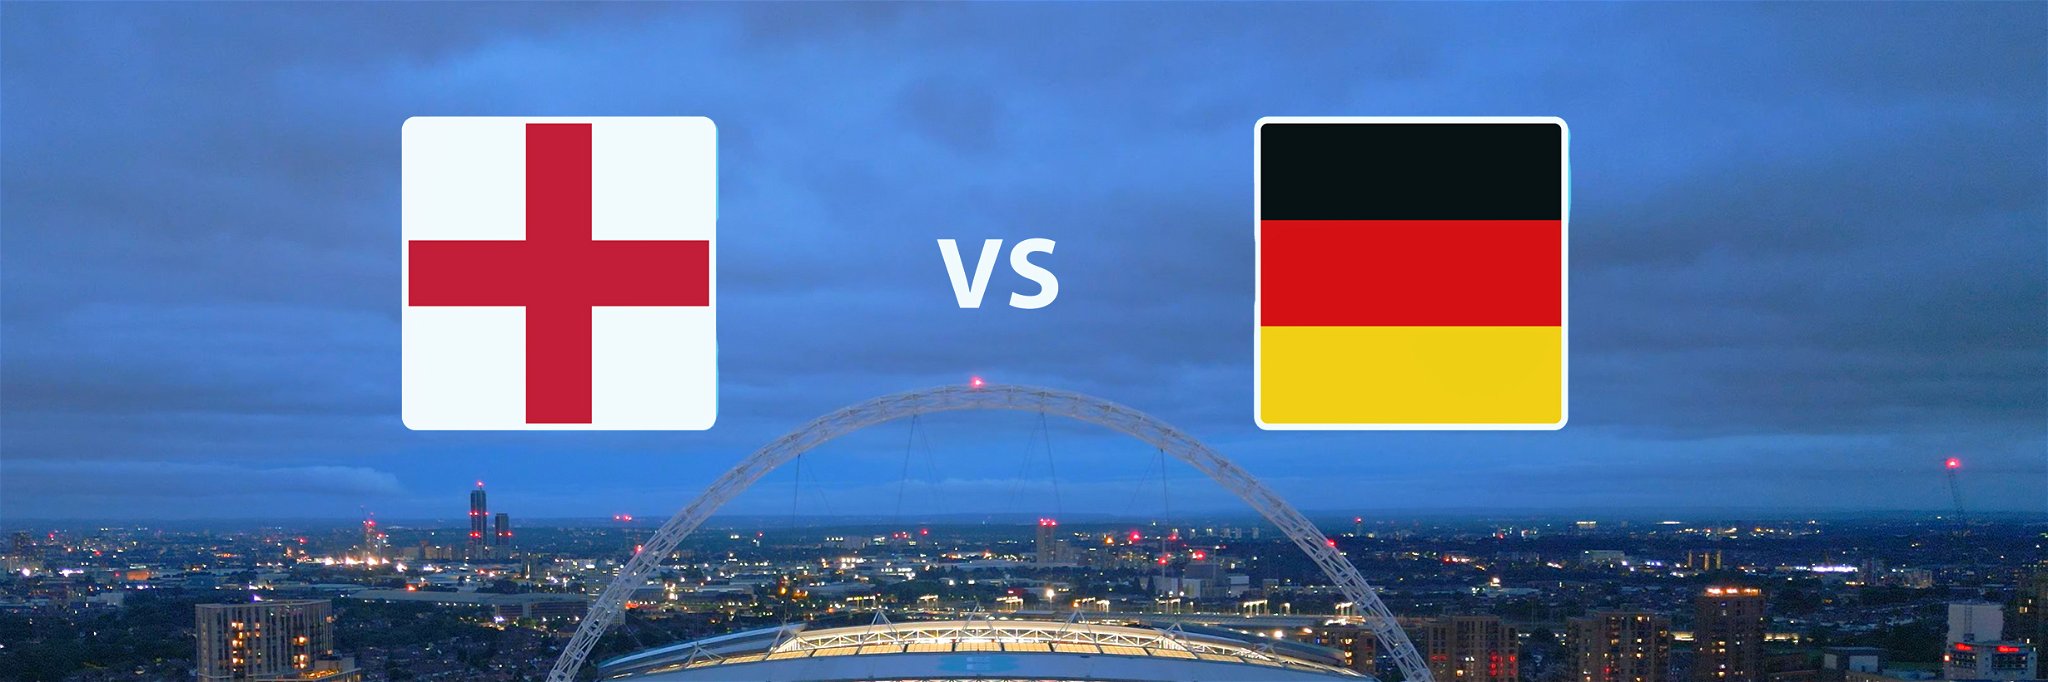 The women’s Euro 2022 Final pits Germany against the hosts at a sold-out Wembley Stadium on Sunday.